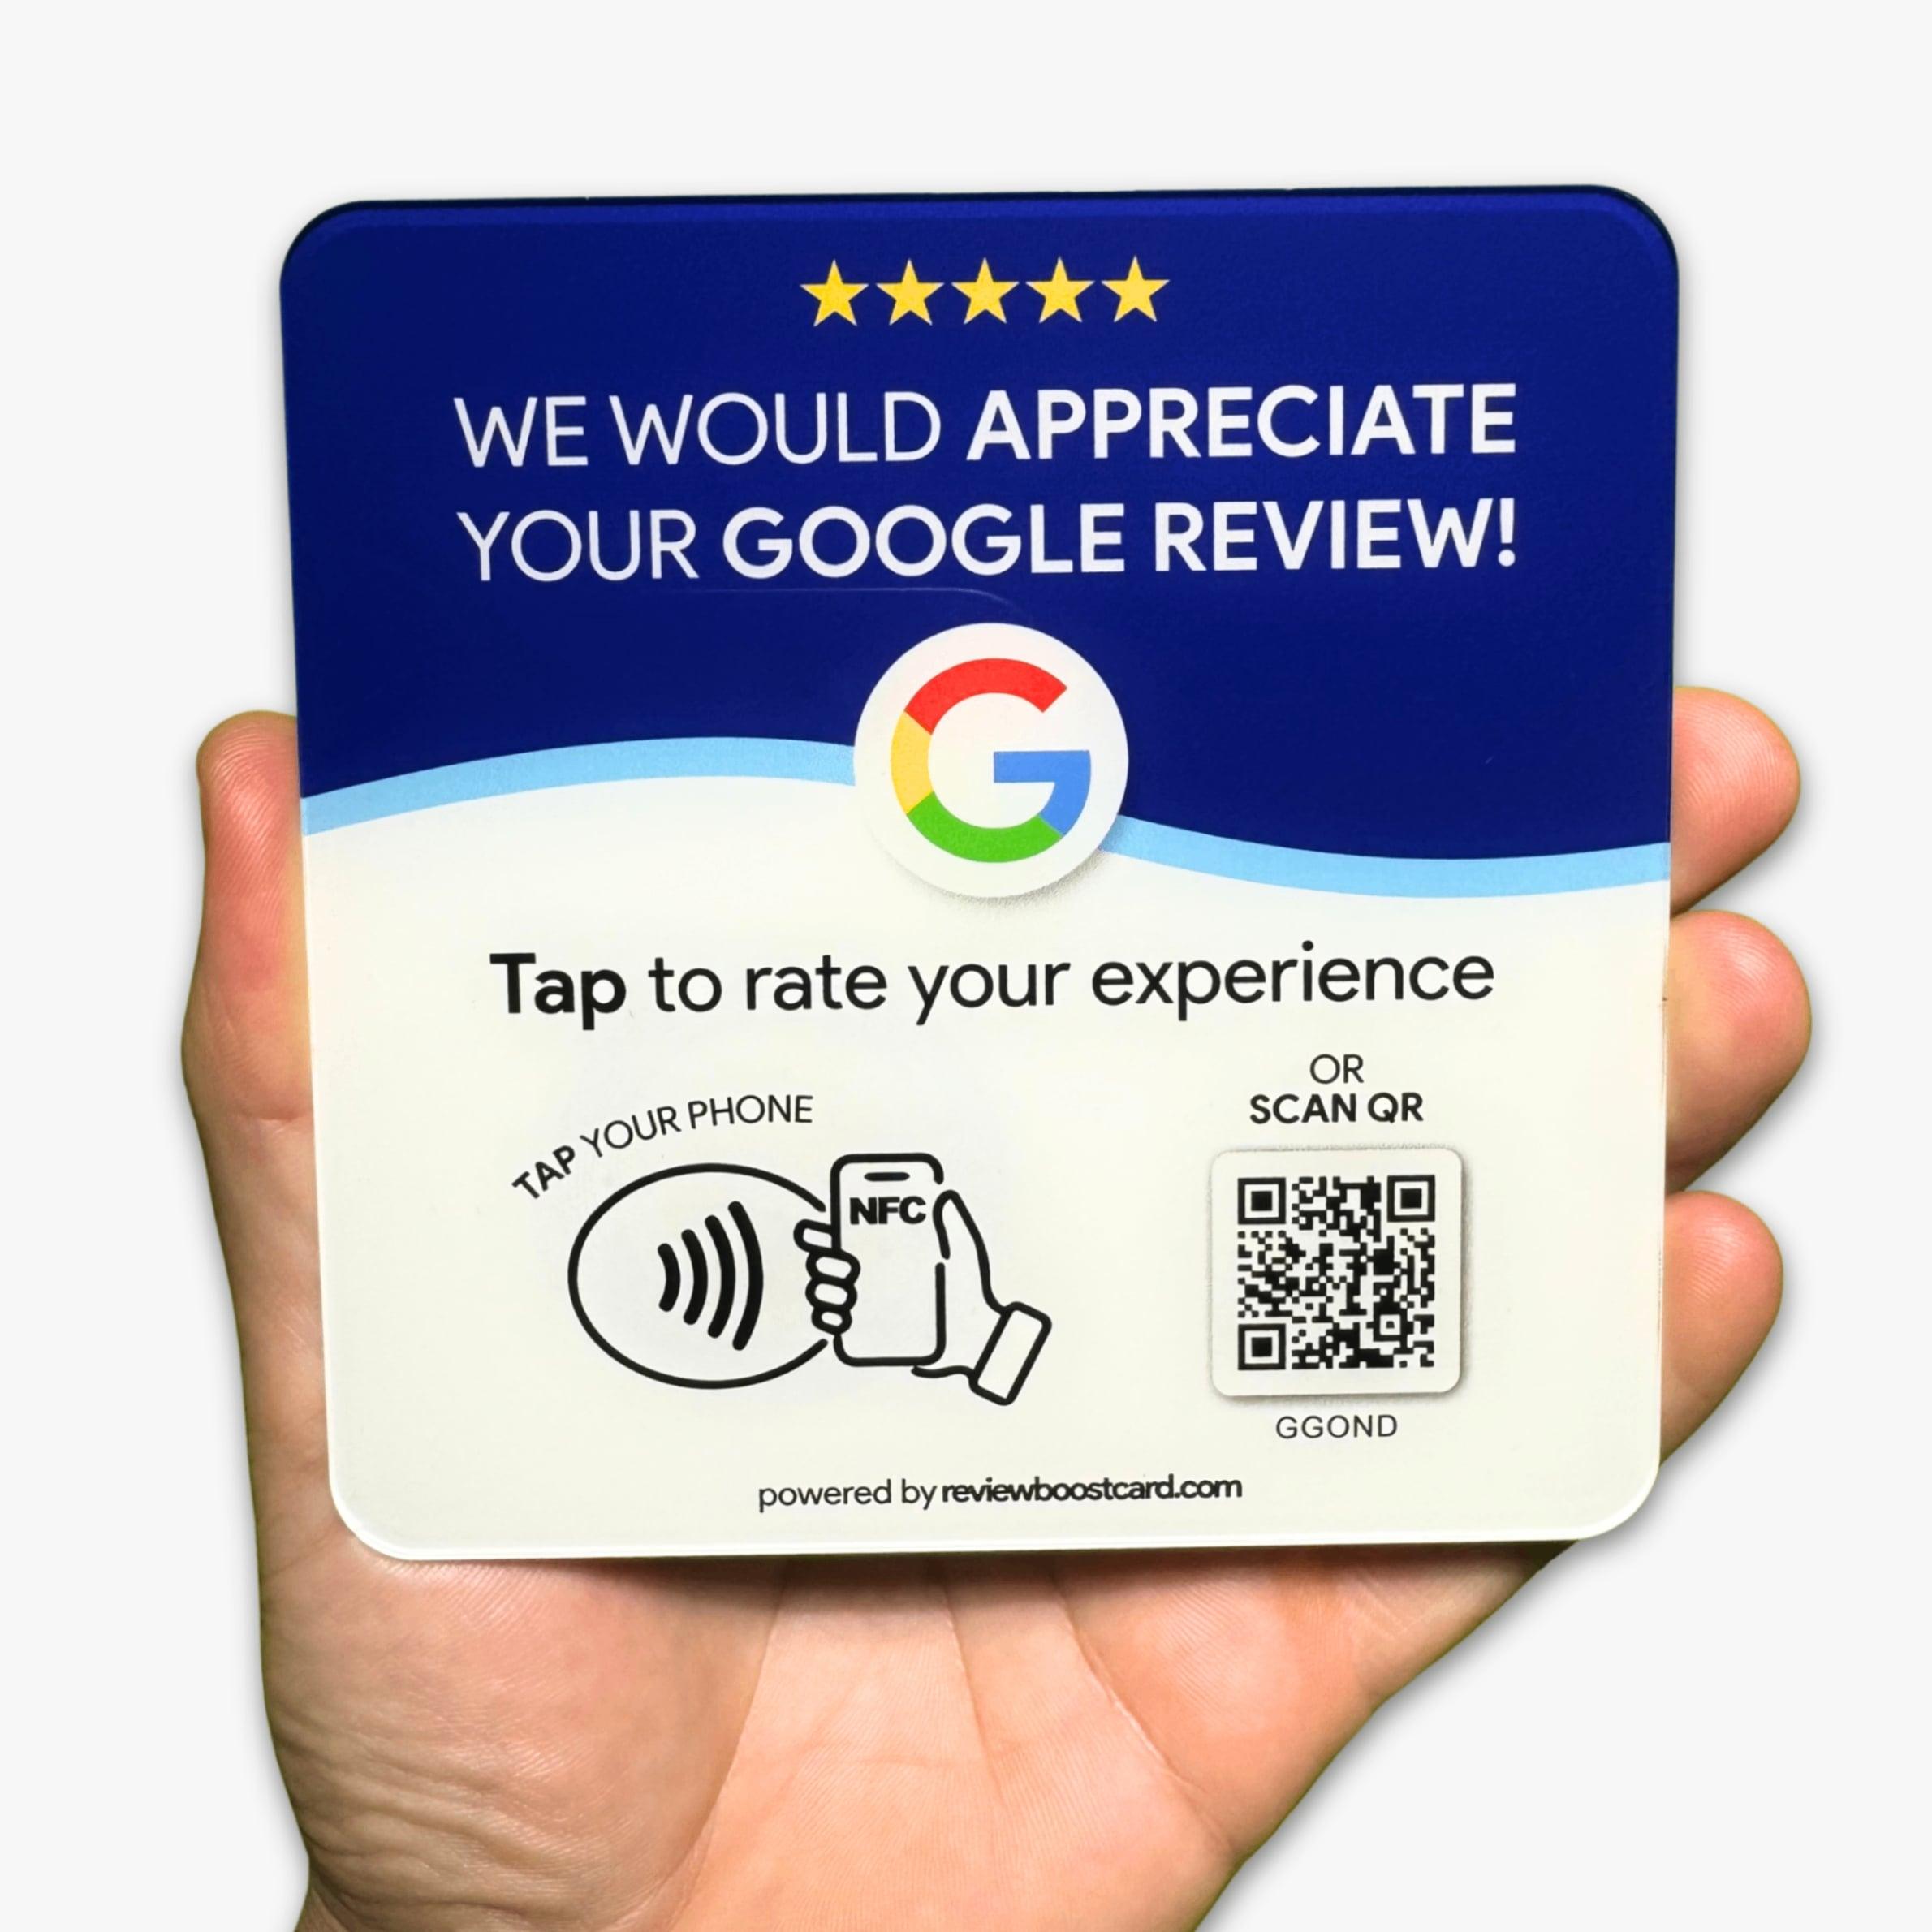 A hand holding a ReviewBoost plaque with text encouraging customers to leave a Google review by tapping their phone or scanning the QR code